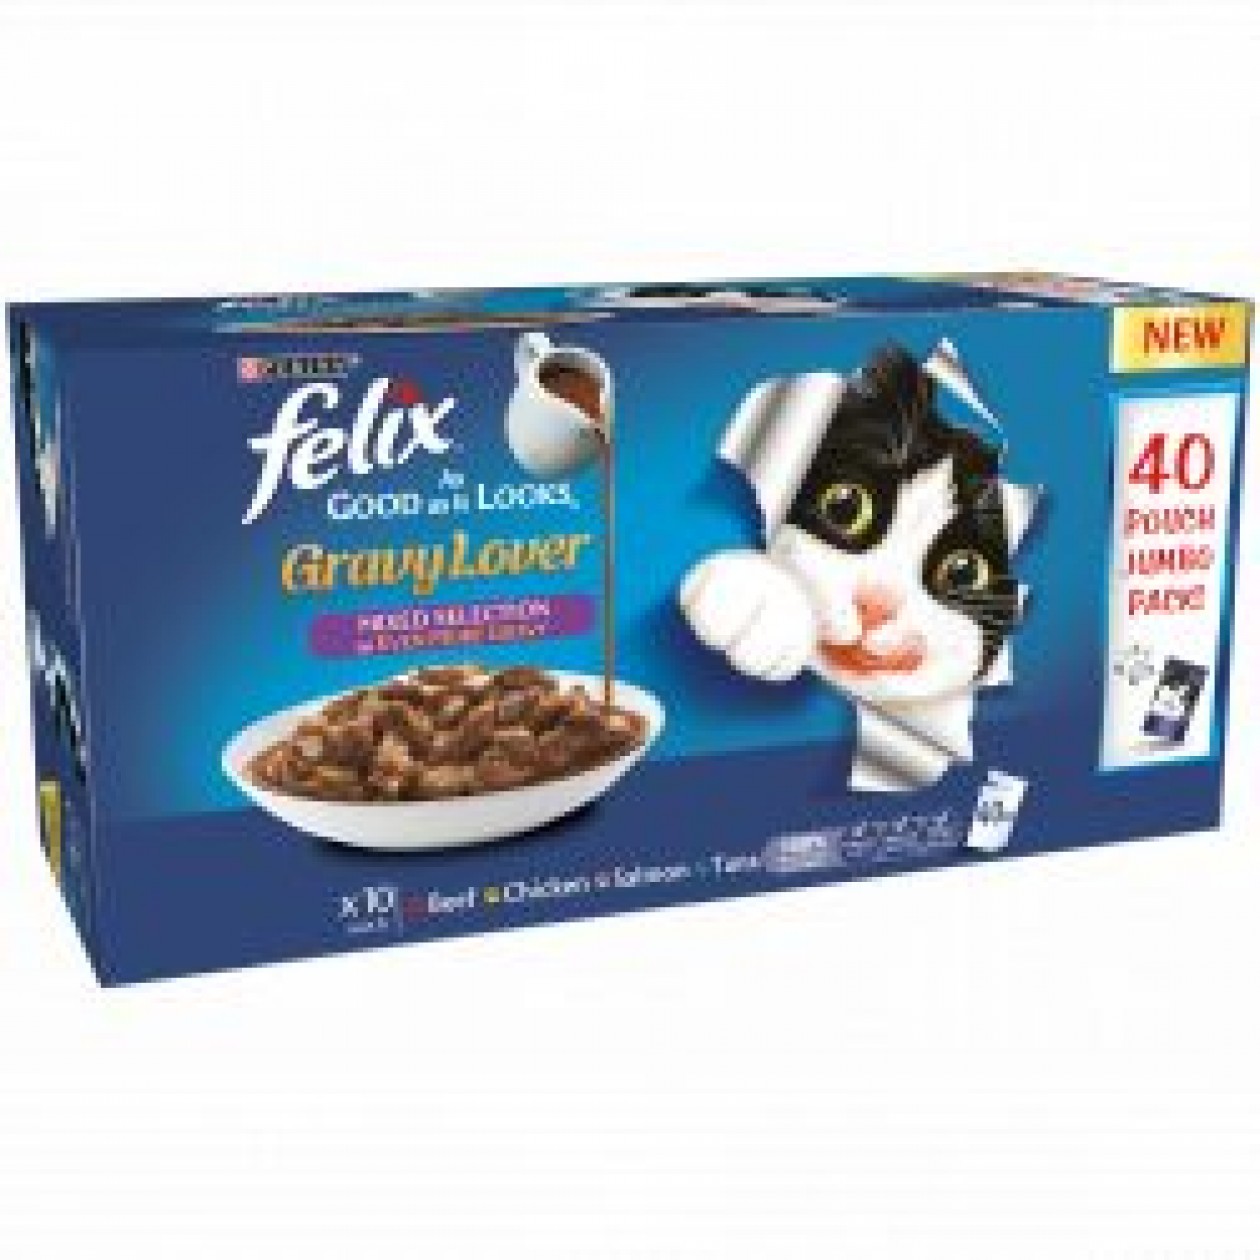 Felix As Good As It Looks Gravy Lover Mixed Selection 40 pack, 100g